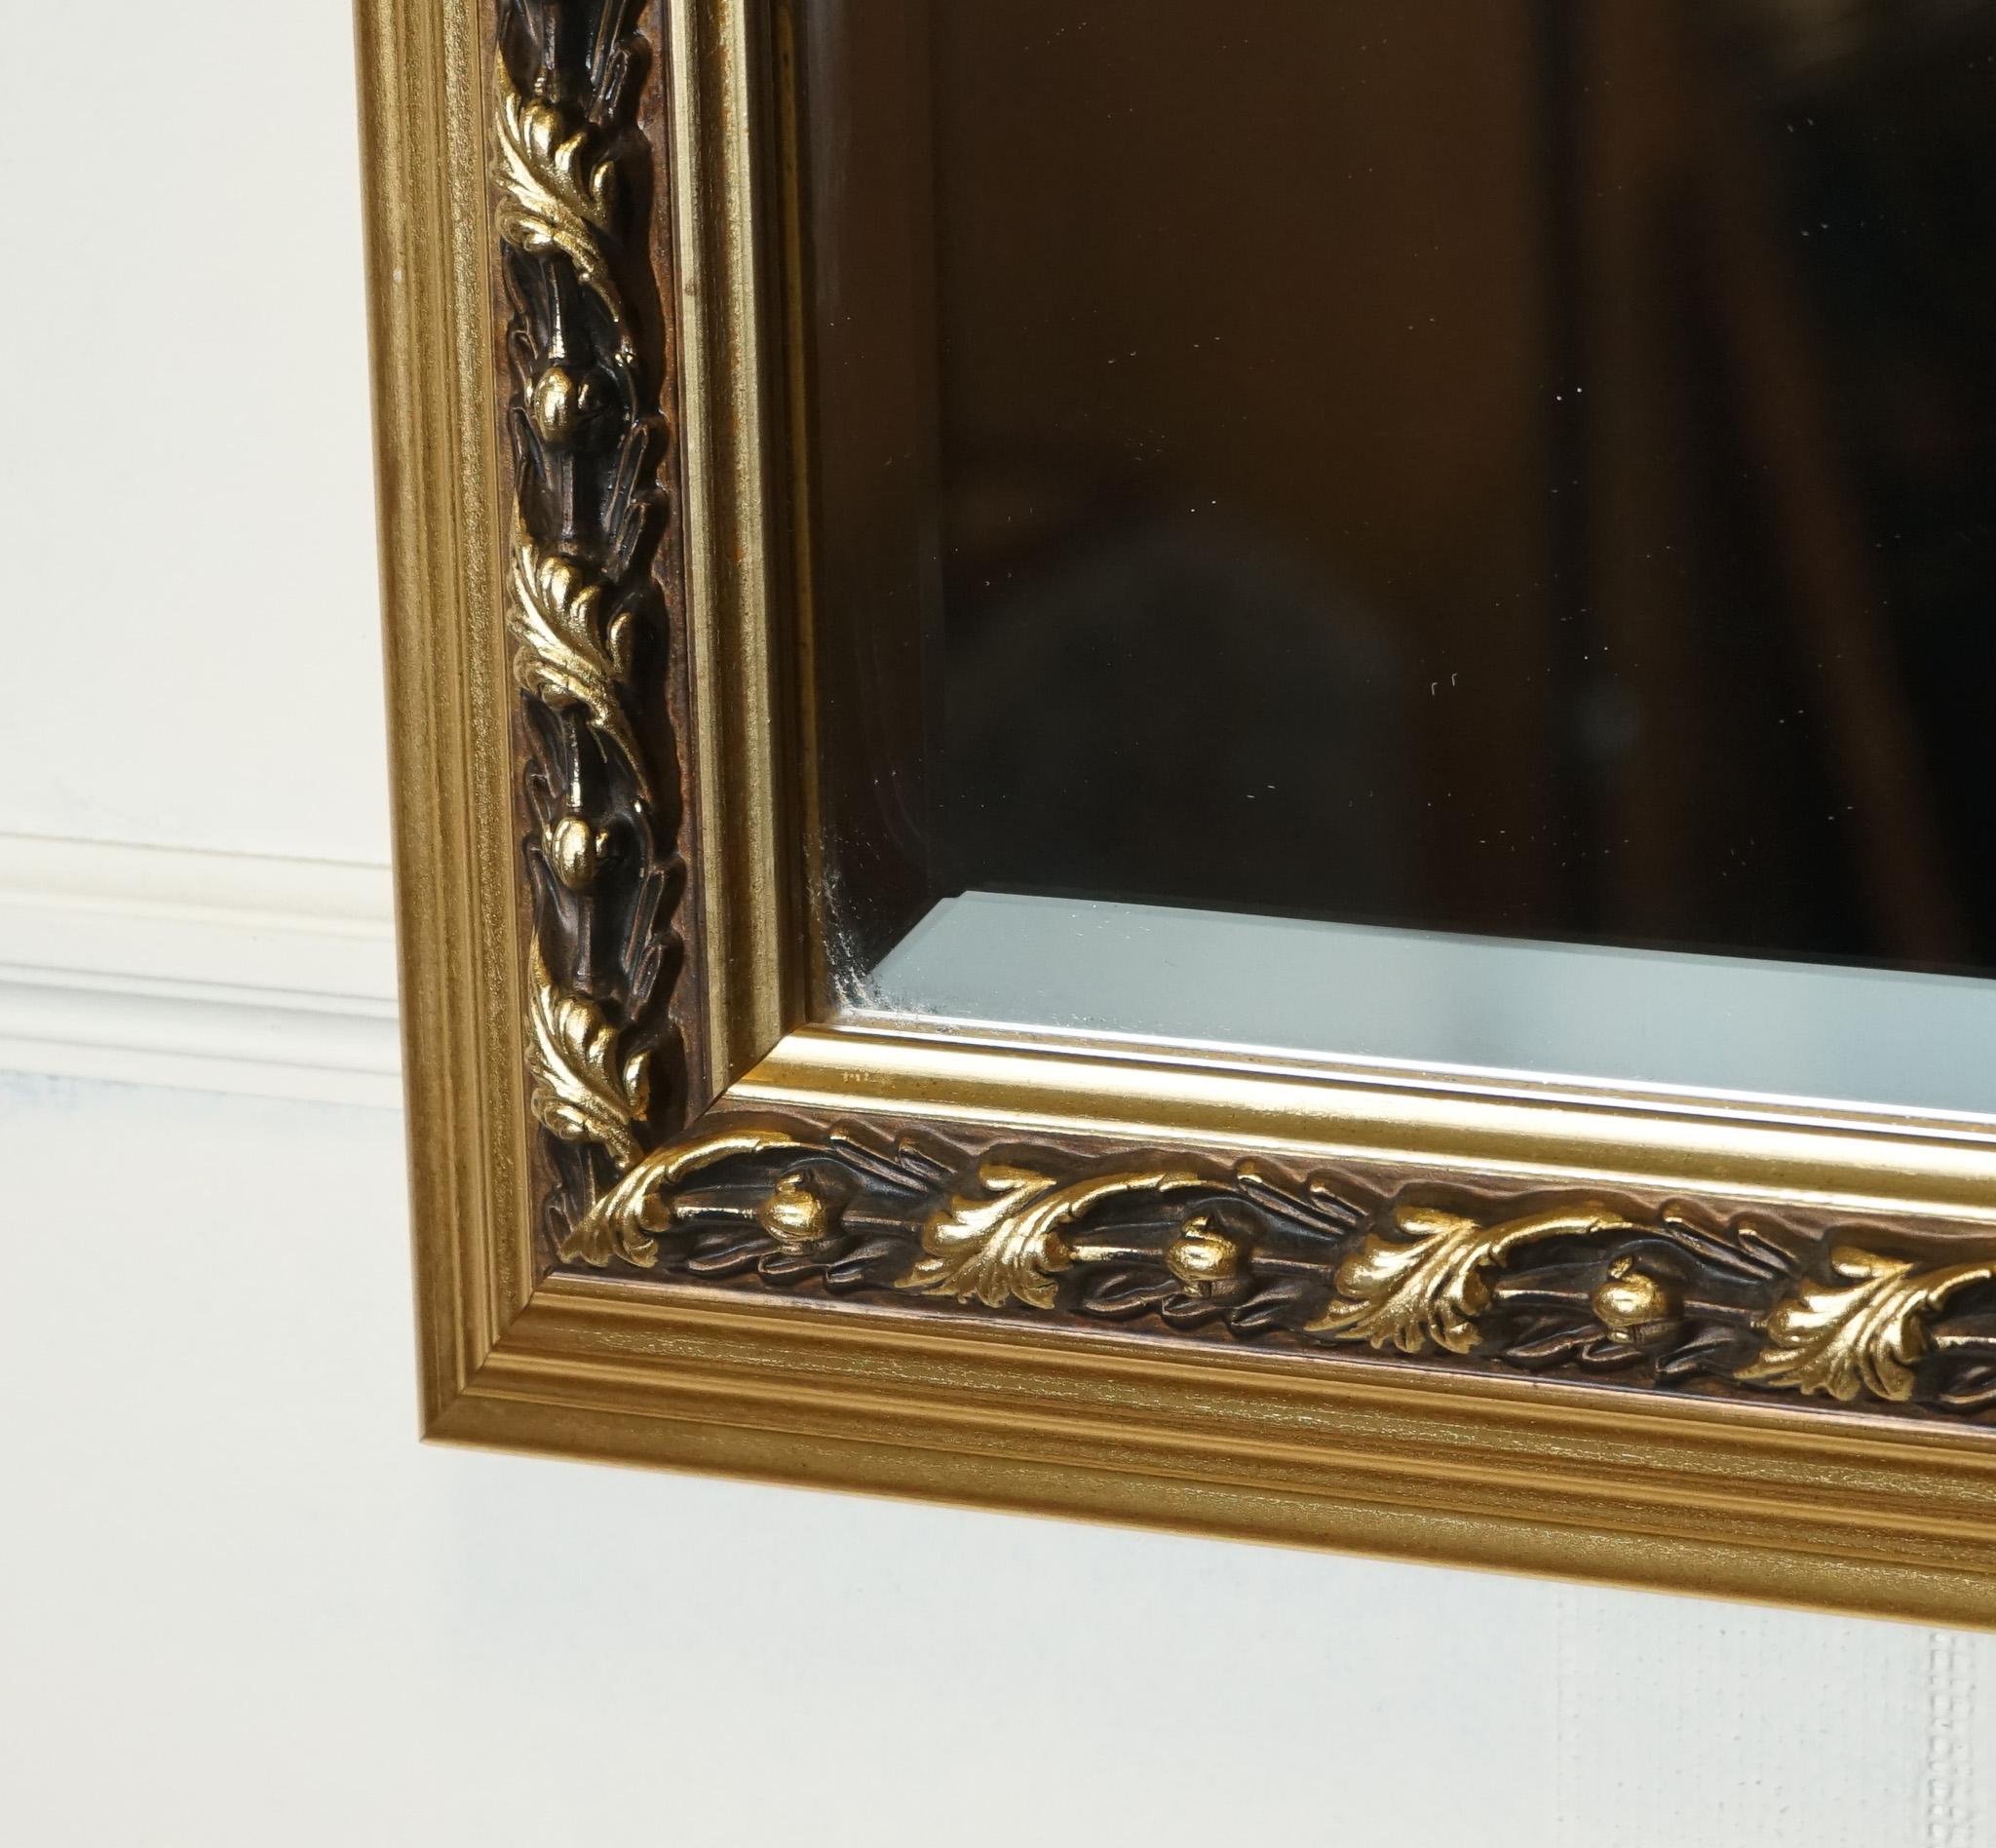 LOVELY GOLD ORNATE RECTANGLE BEVELLED MIRROR j1 In Good Condition For Sale In Pulborough, GB